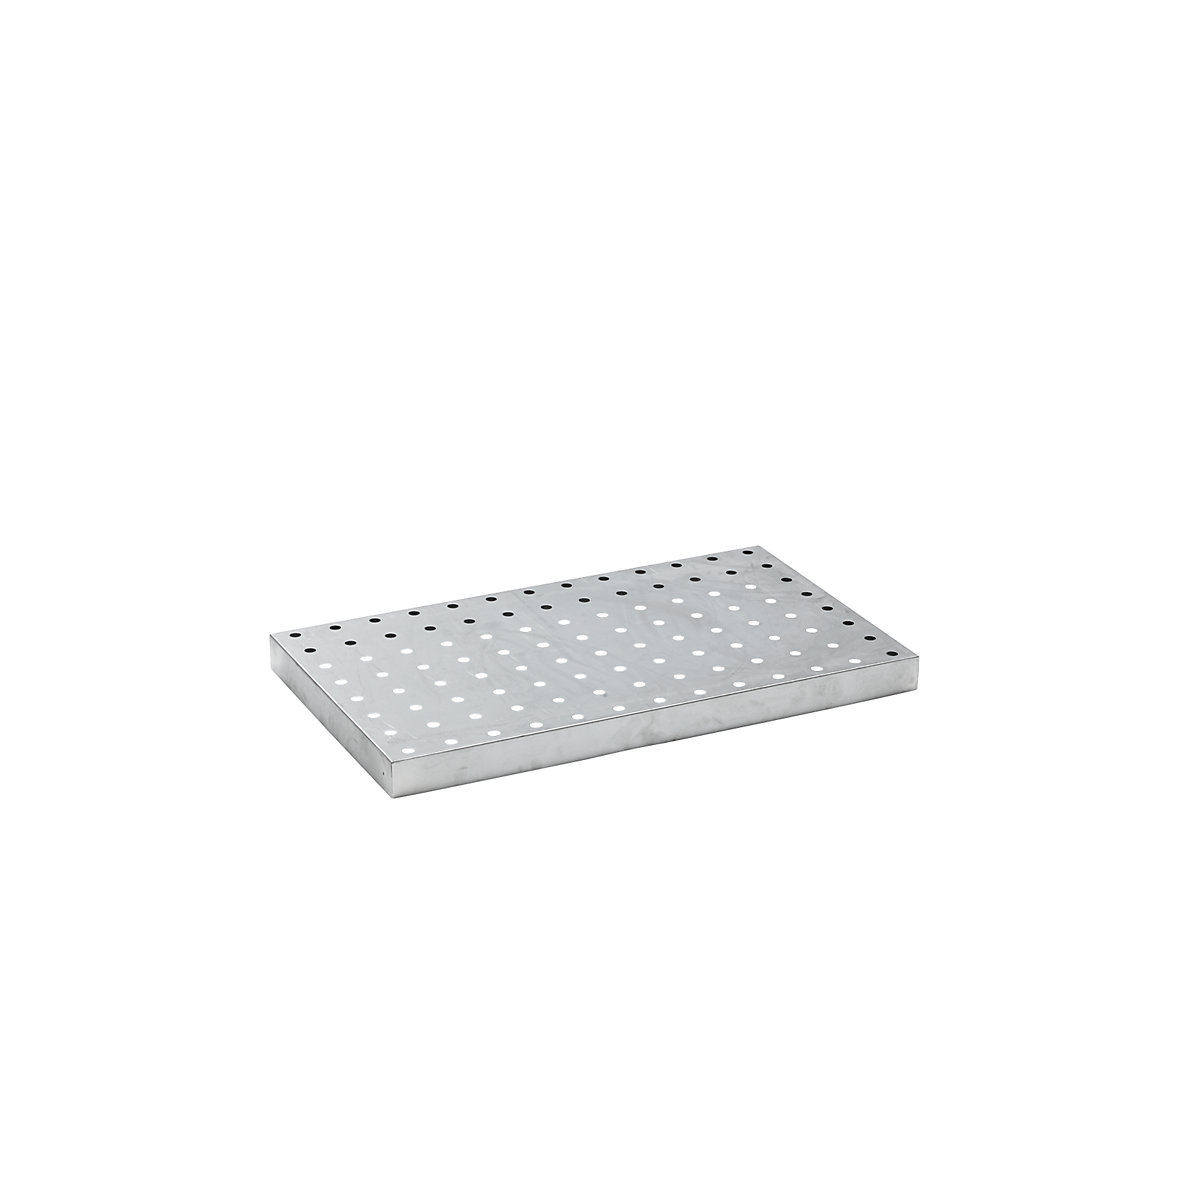 Perforated sheet metal grate – eurokraft basic, zinc plated, for LxWxH 1000 x 600 x 70 mm-2